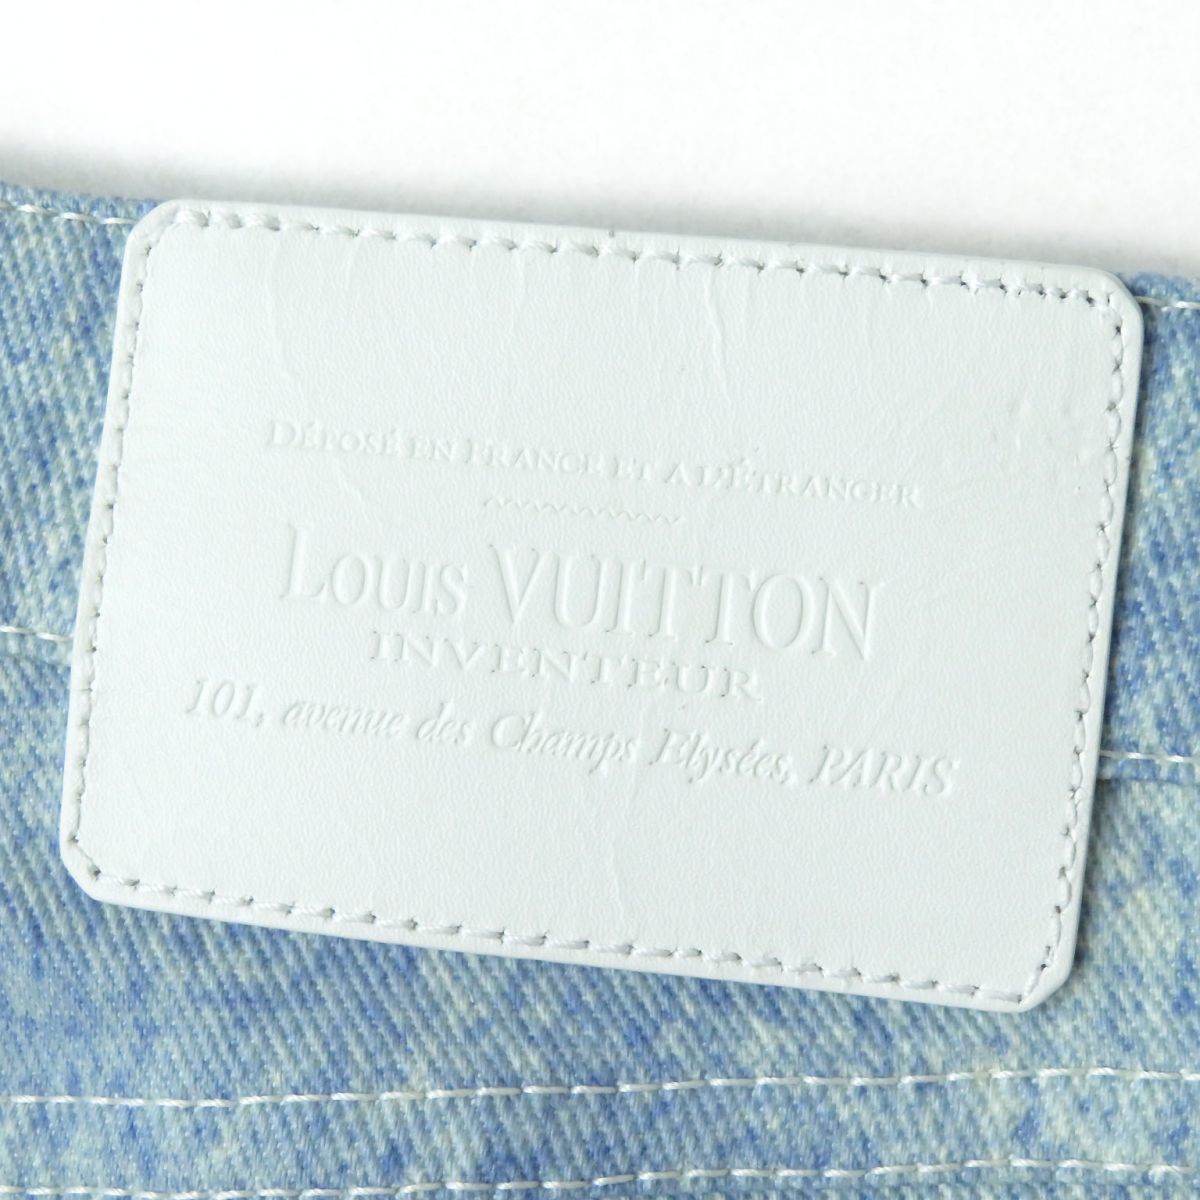  ultimate beautiful goods * regular goods LOUIS VUITTON Louis Vuitton Logo button * leather chi attaching marble color Denim pants jeans lady's 34 Italy made 